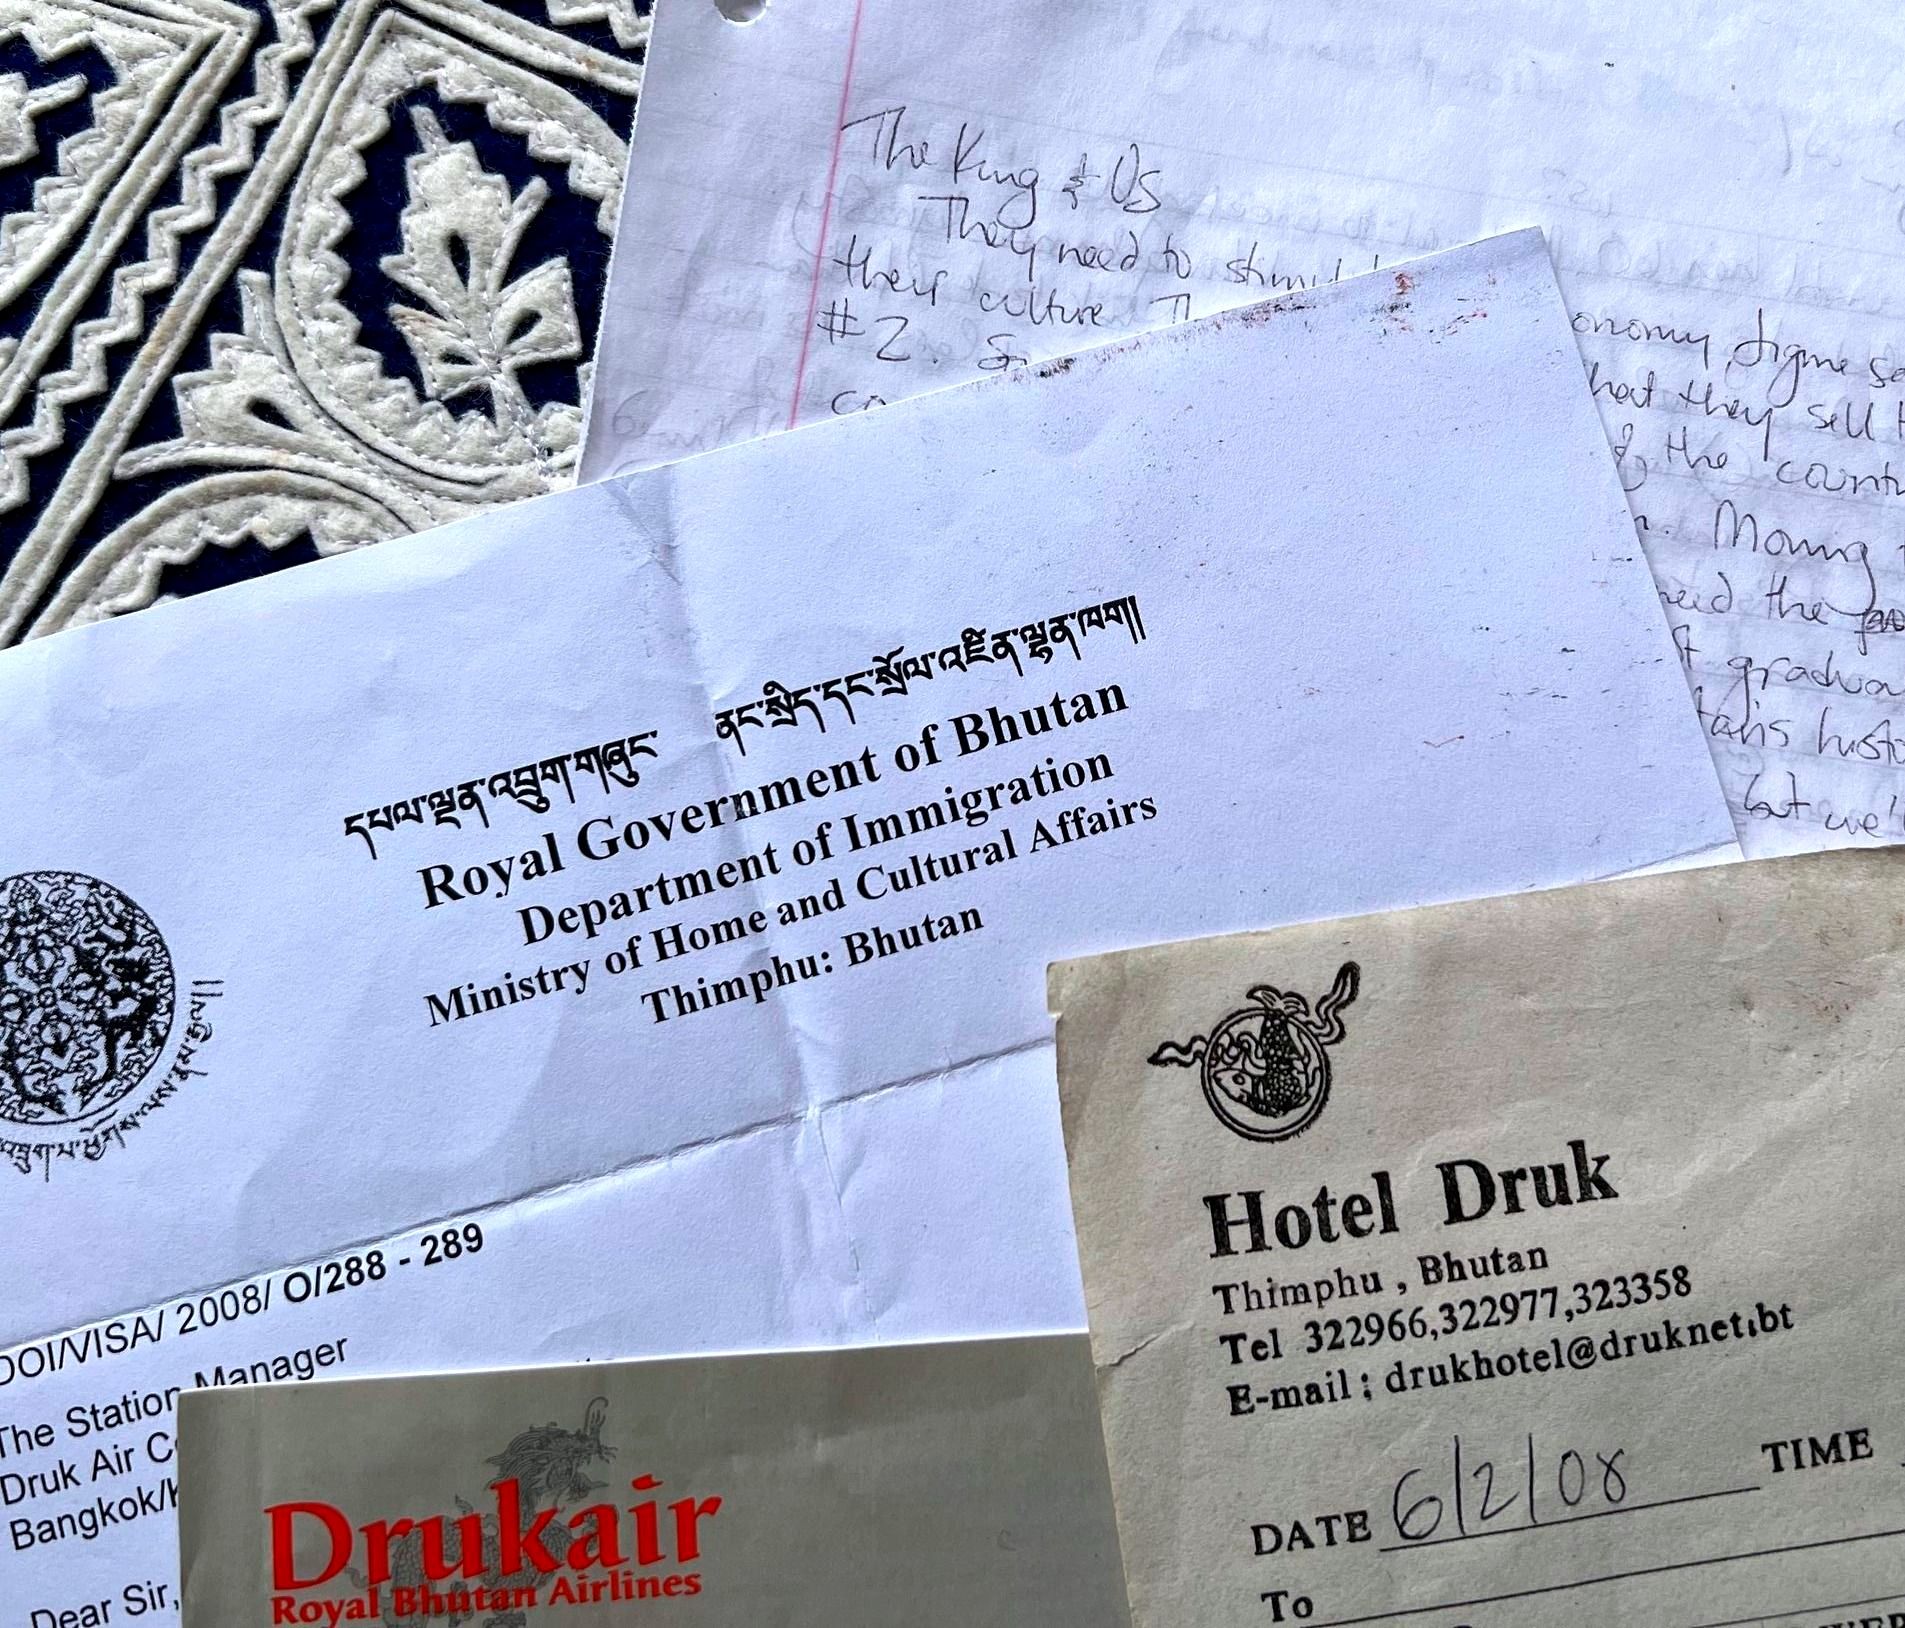 Four documents arrayed against a background of royal-blue-and-white fabric in the lefthand corner. The top right document looks like handwriting on notebook paper, with the heading “The King and Us”; below and to the left of that is a printed document that headed with “Royal Government in Bhutan Department of Immigration” in both Bhutanese and English and appears to be a visa; to the bottom and right of that, a paper headed with the words “Hotel Drunk” and contact information in Thimpu, Bhutan, and the handwritten date 6/02/08; at the bottom of the photo is a darker brown piece of paper that says “Drukair, Royal Bhutan Airlines” in orange text.